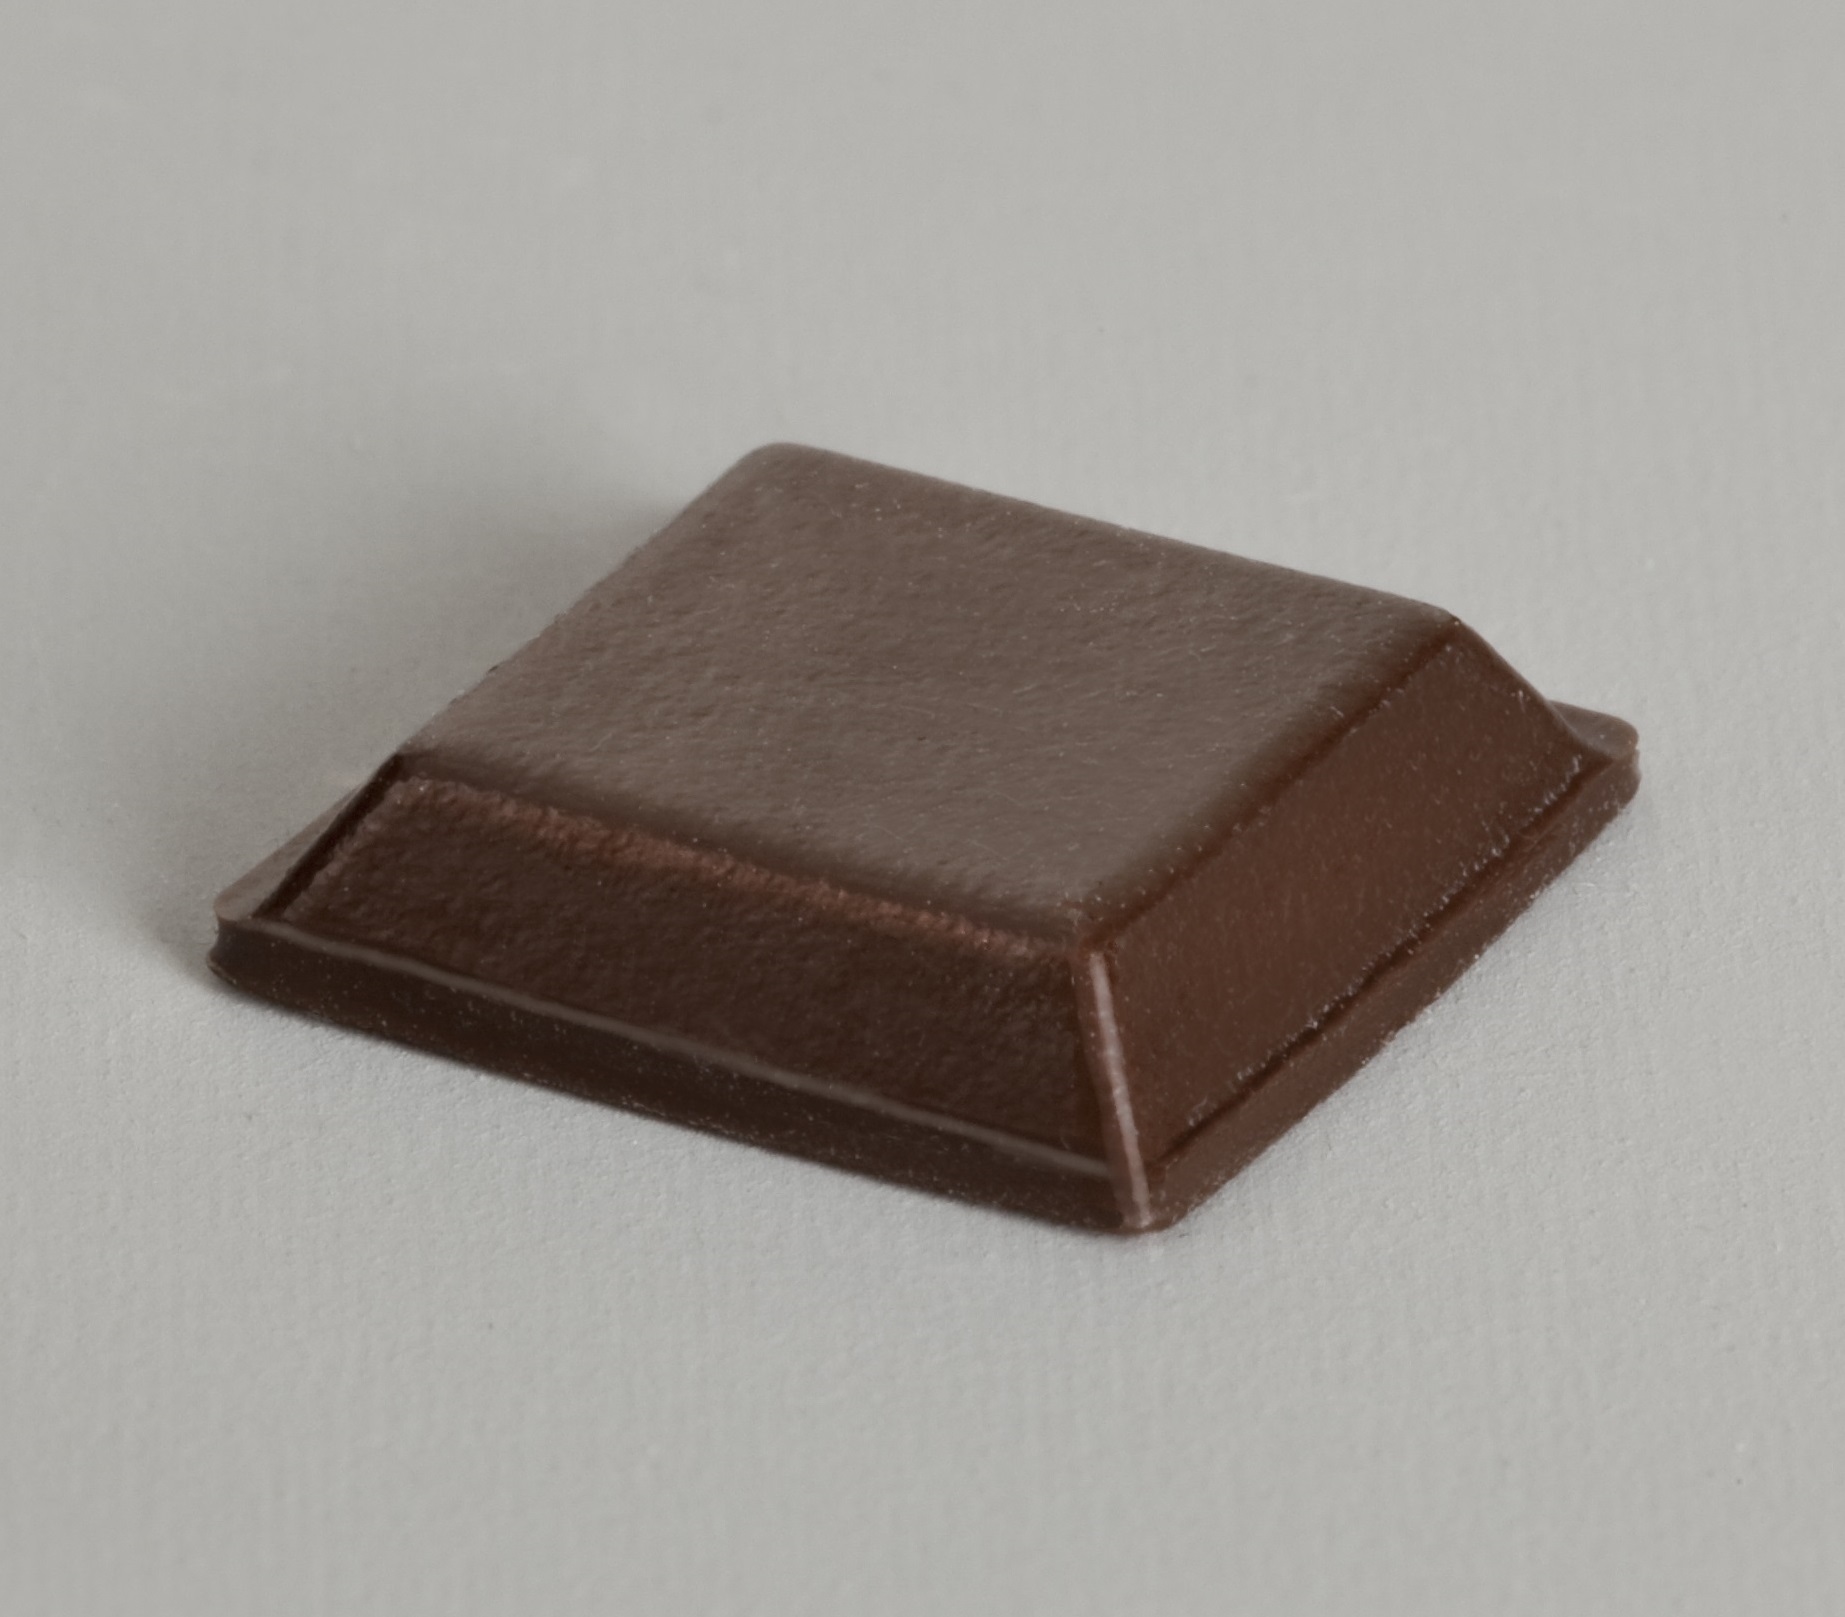 BS-32 BROWN product image